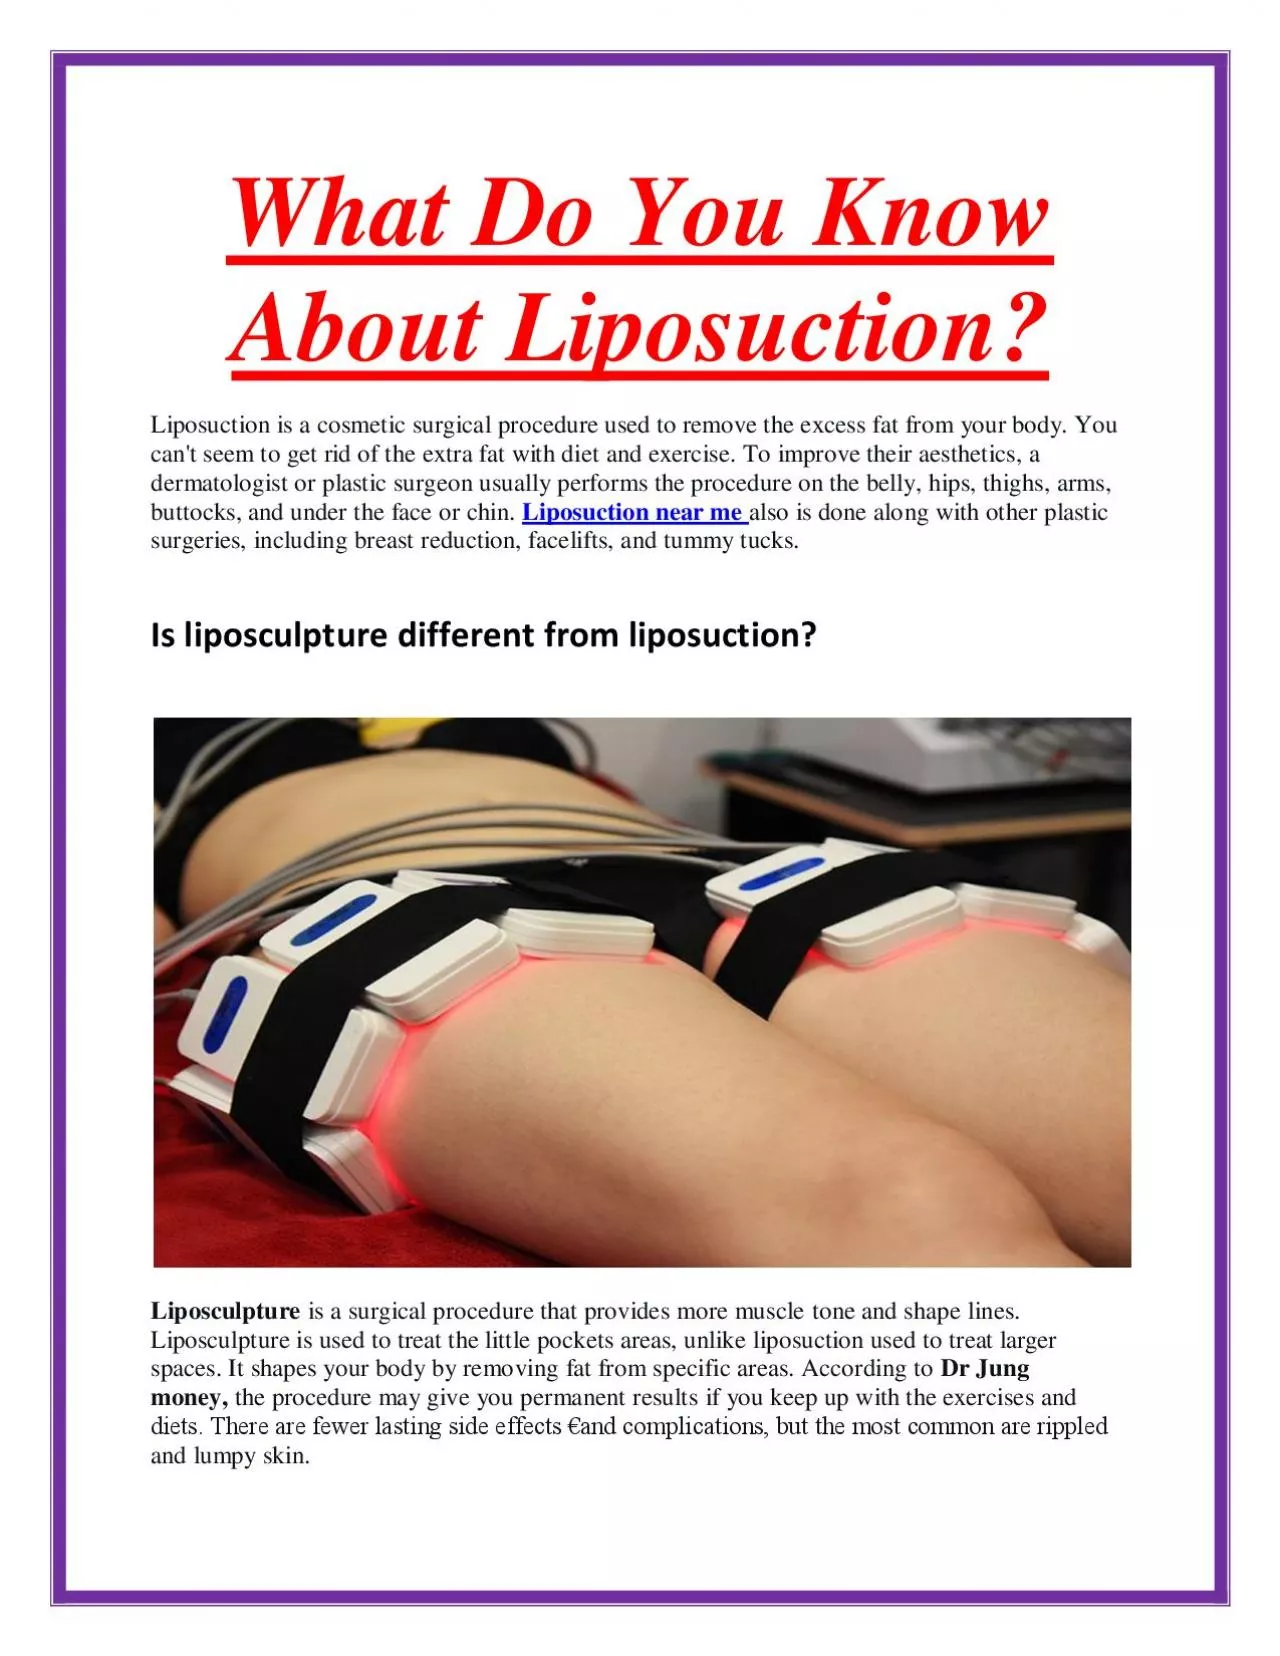 What Do You Know About Liposuction?